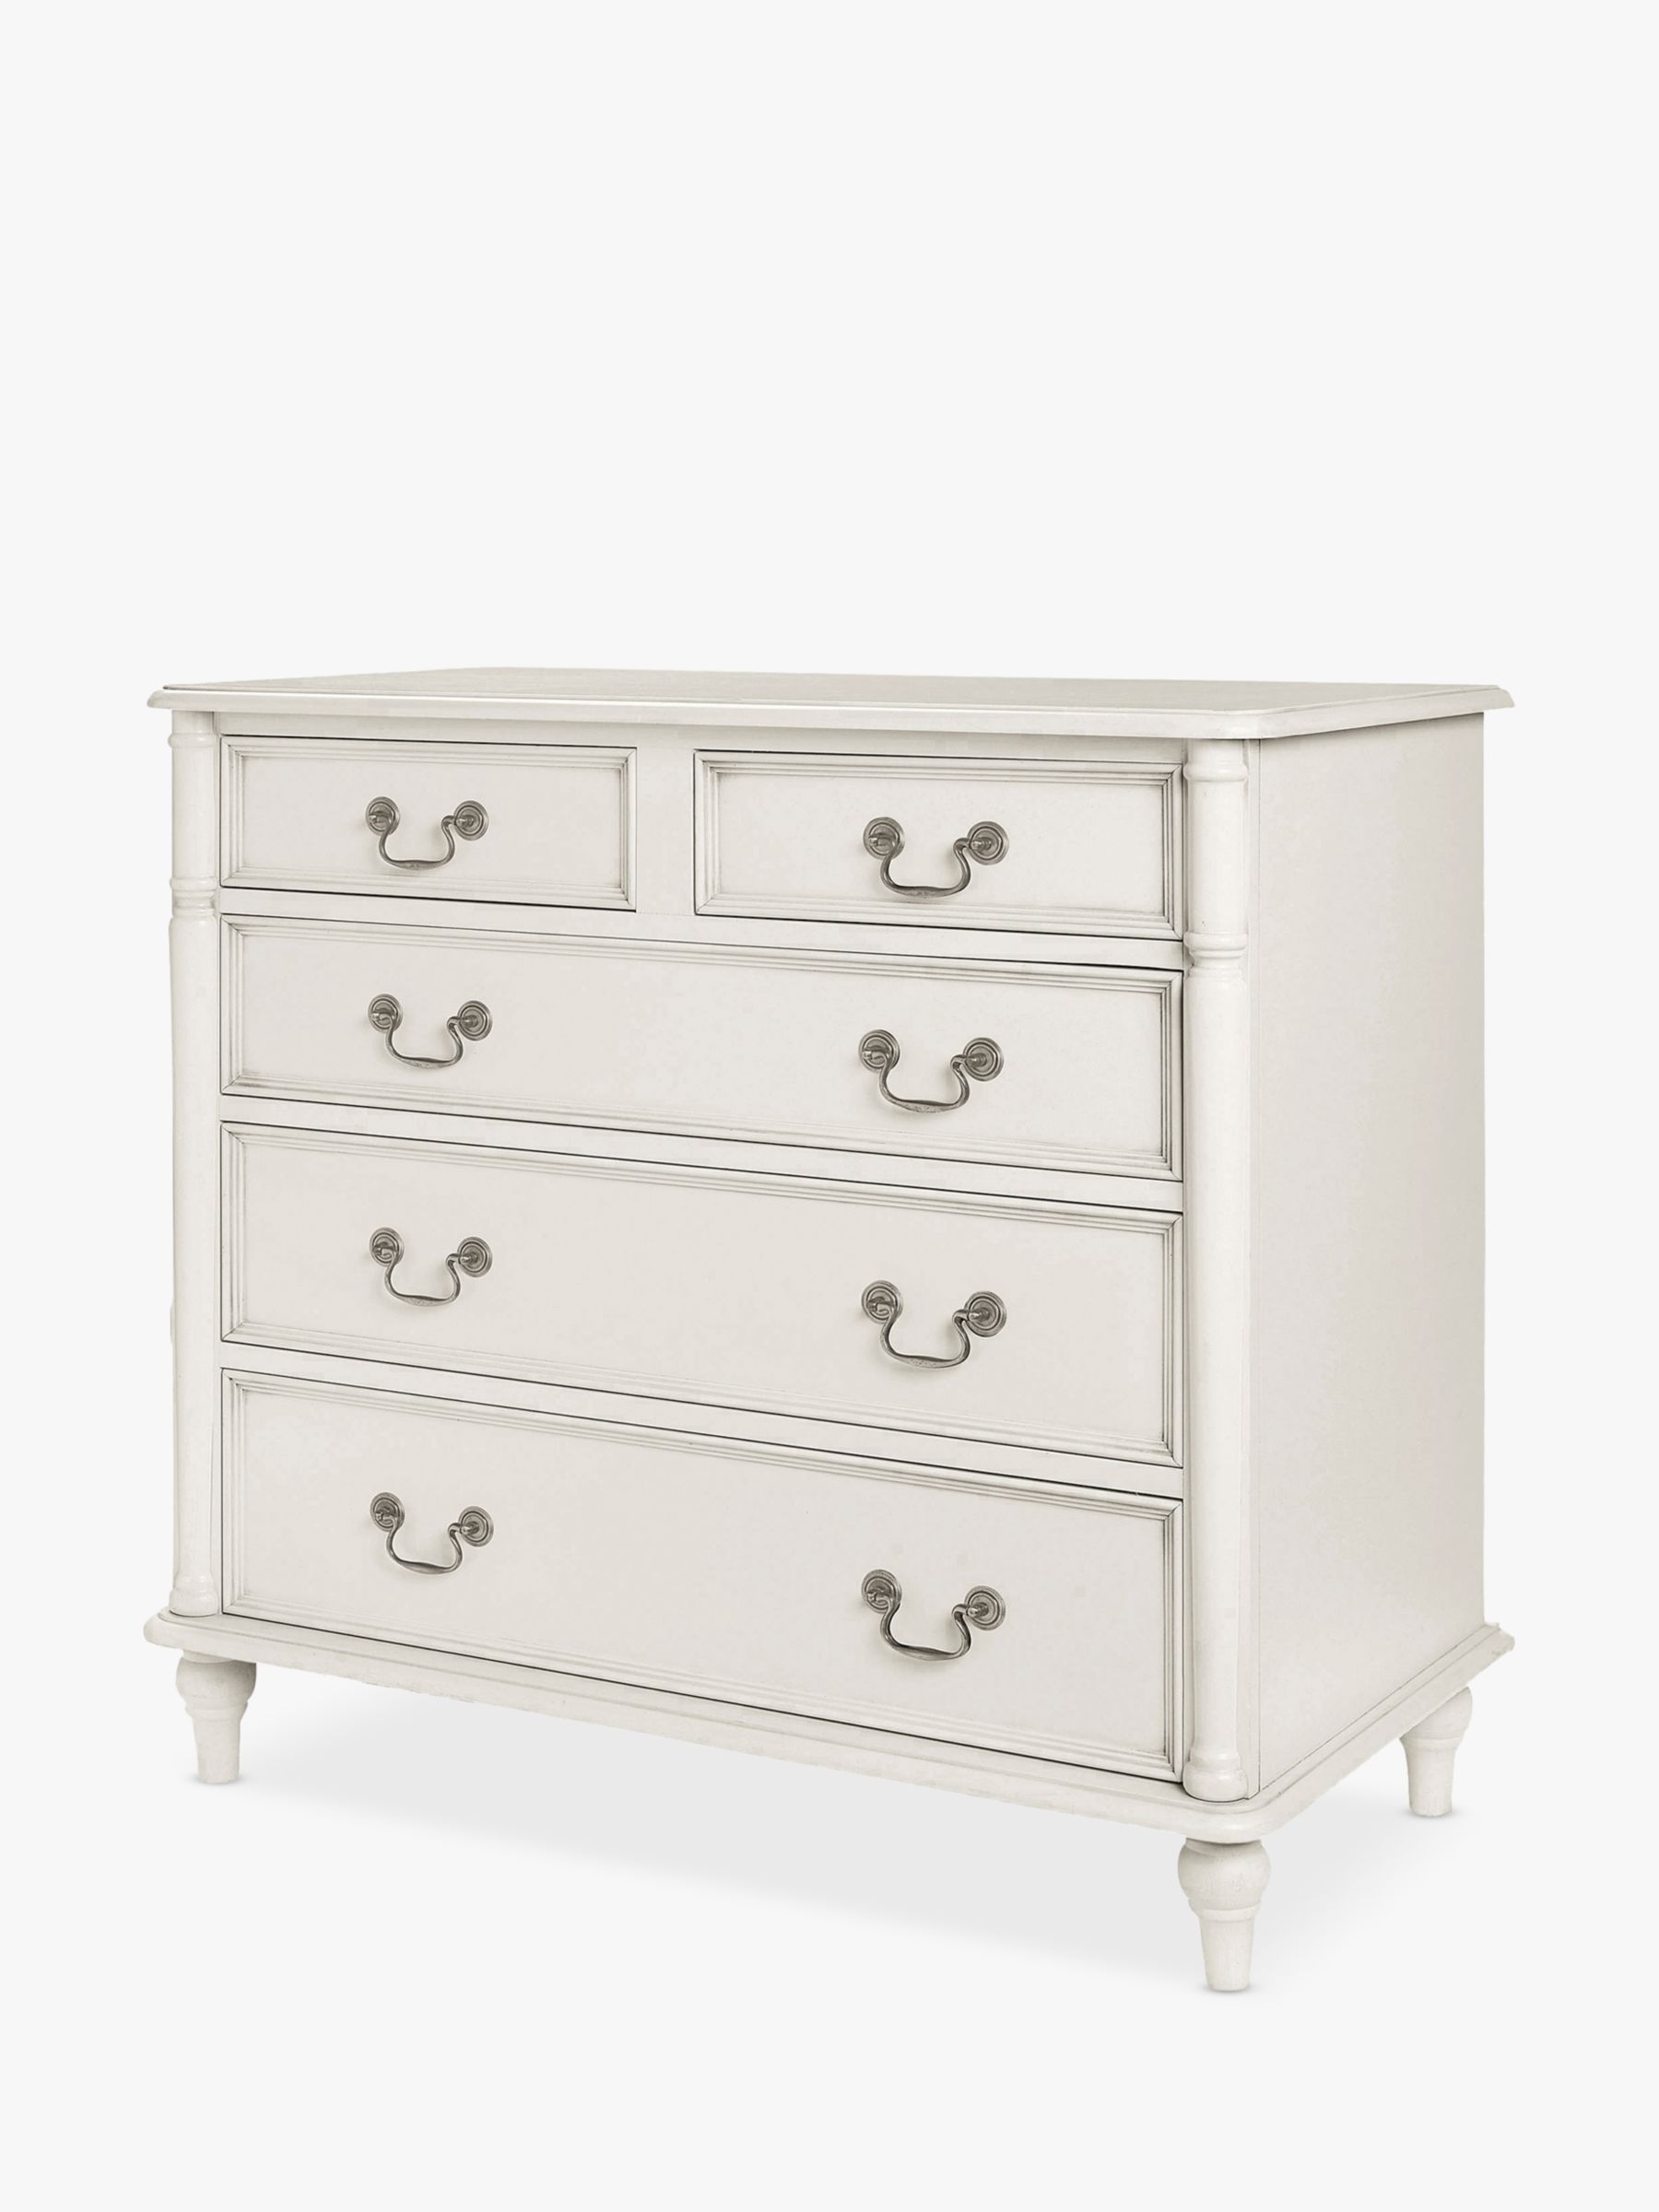 Photo of Laura ashley clifton 5 drawer chest grey